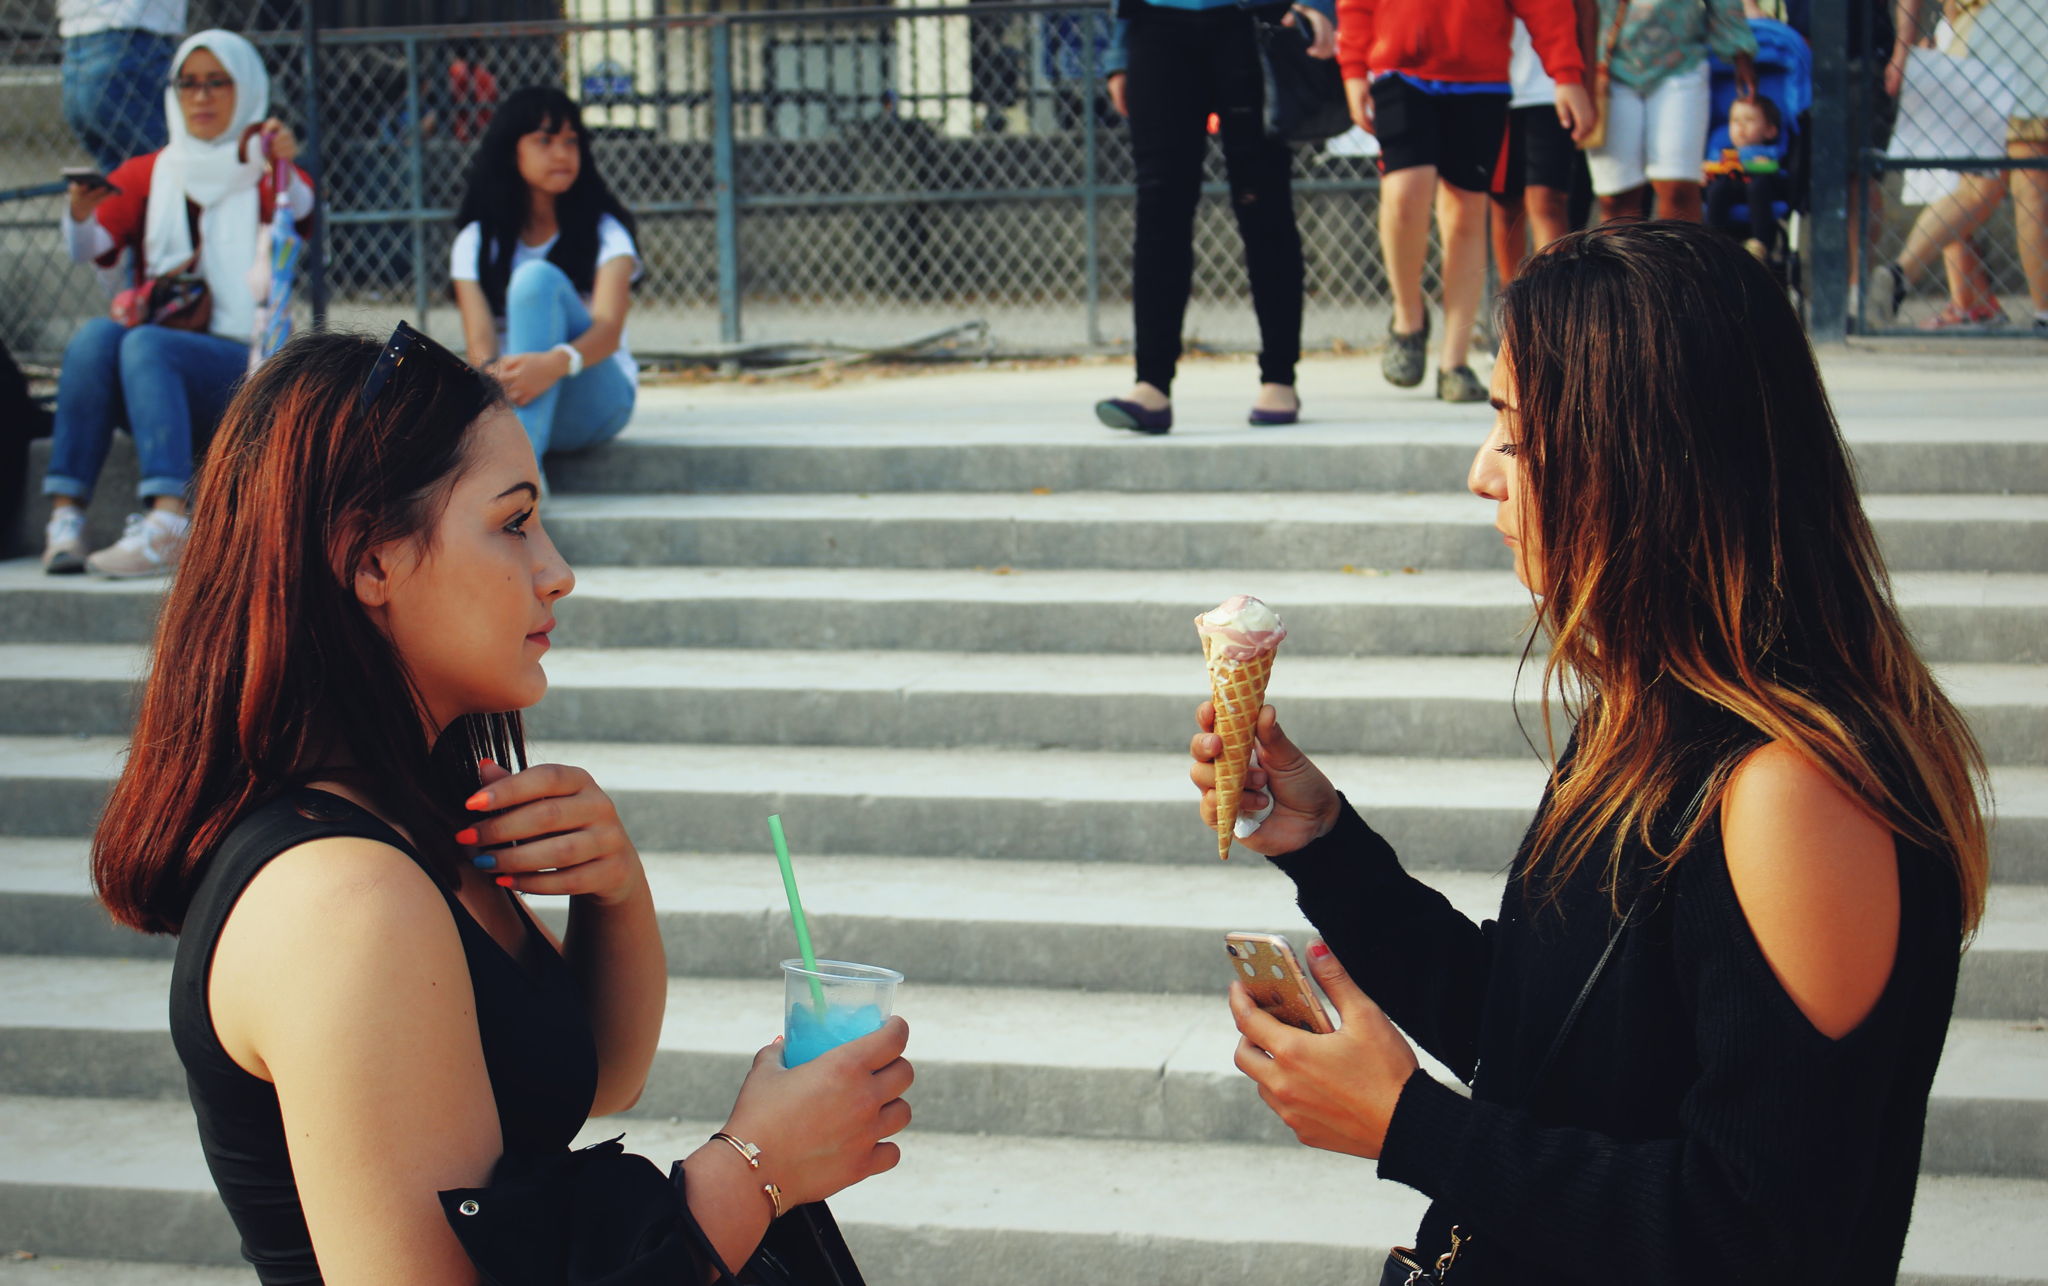 Two girlfriends hanging out in front of stairs eating ice cream and talking.